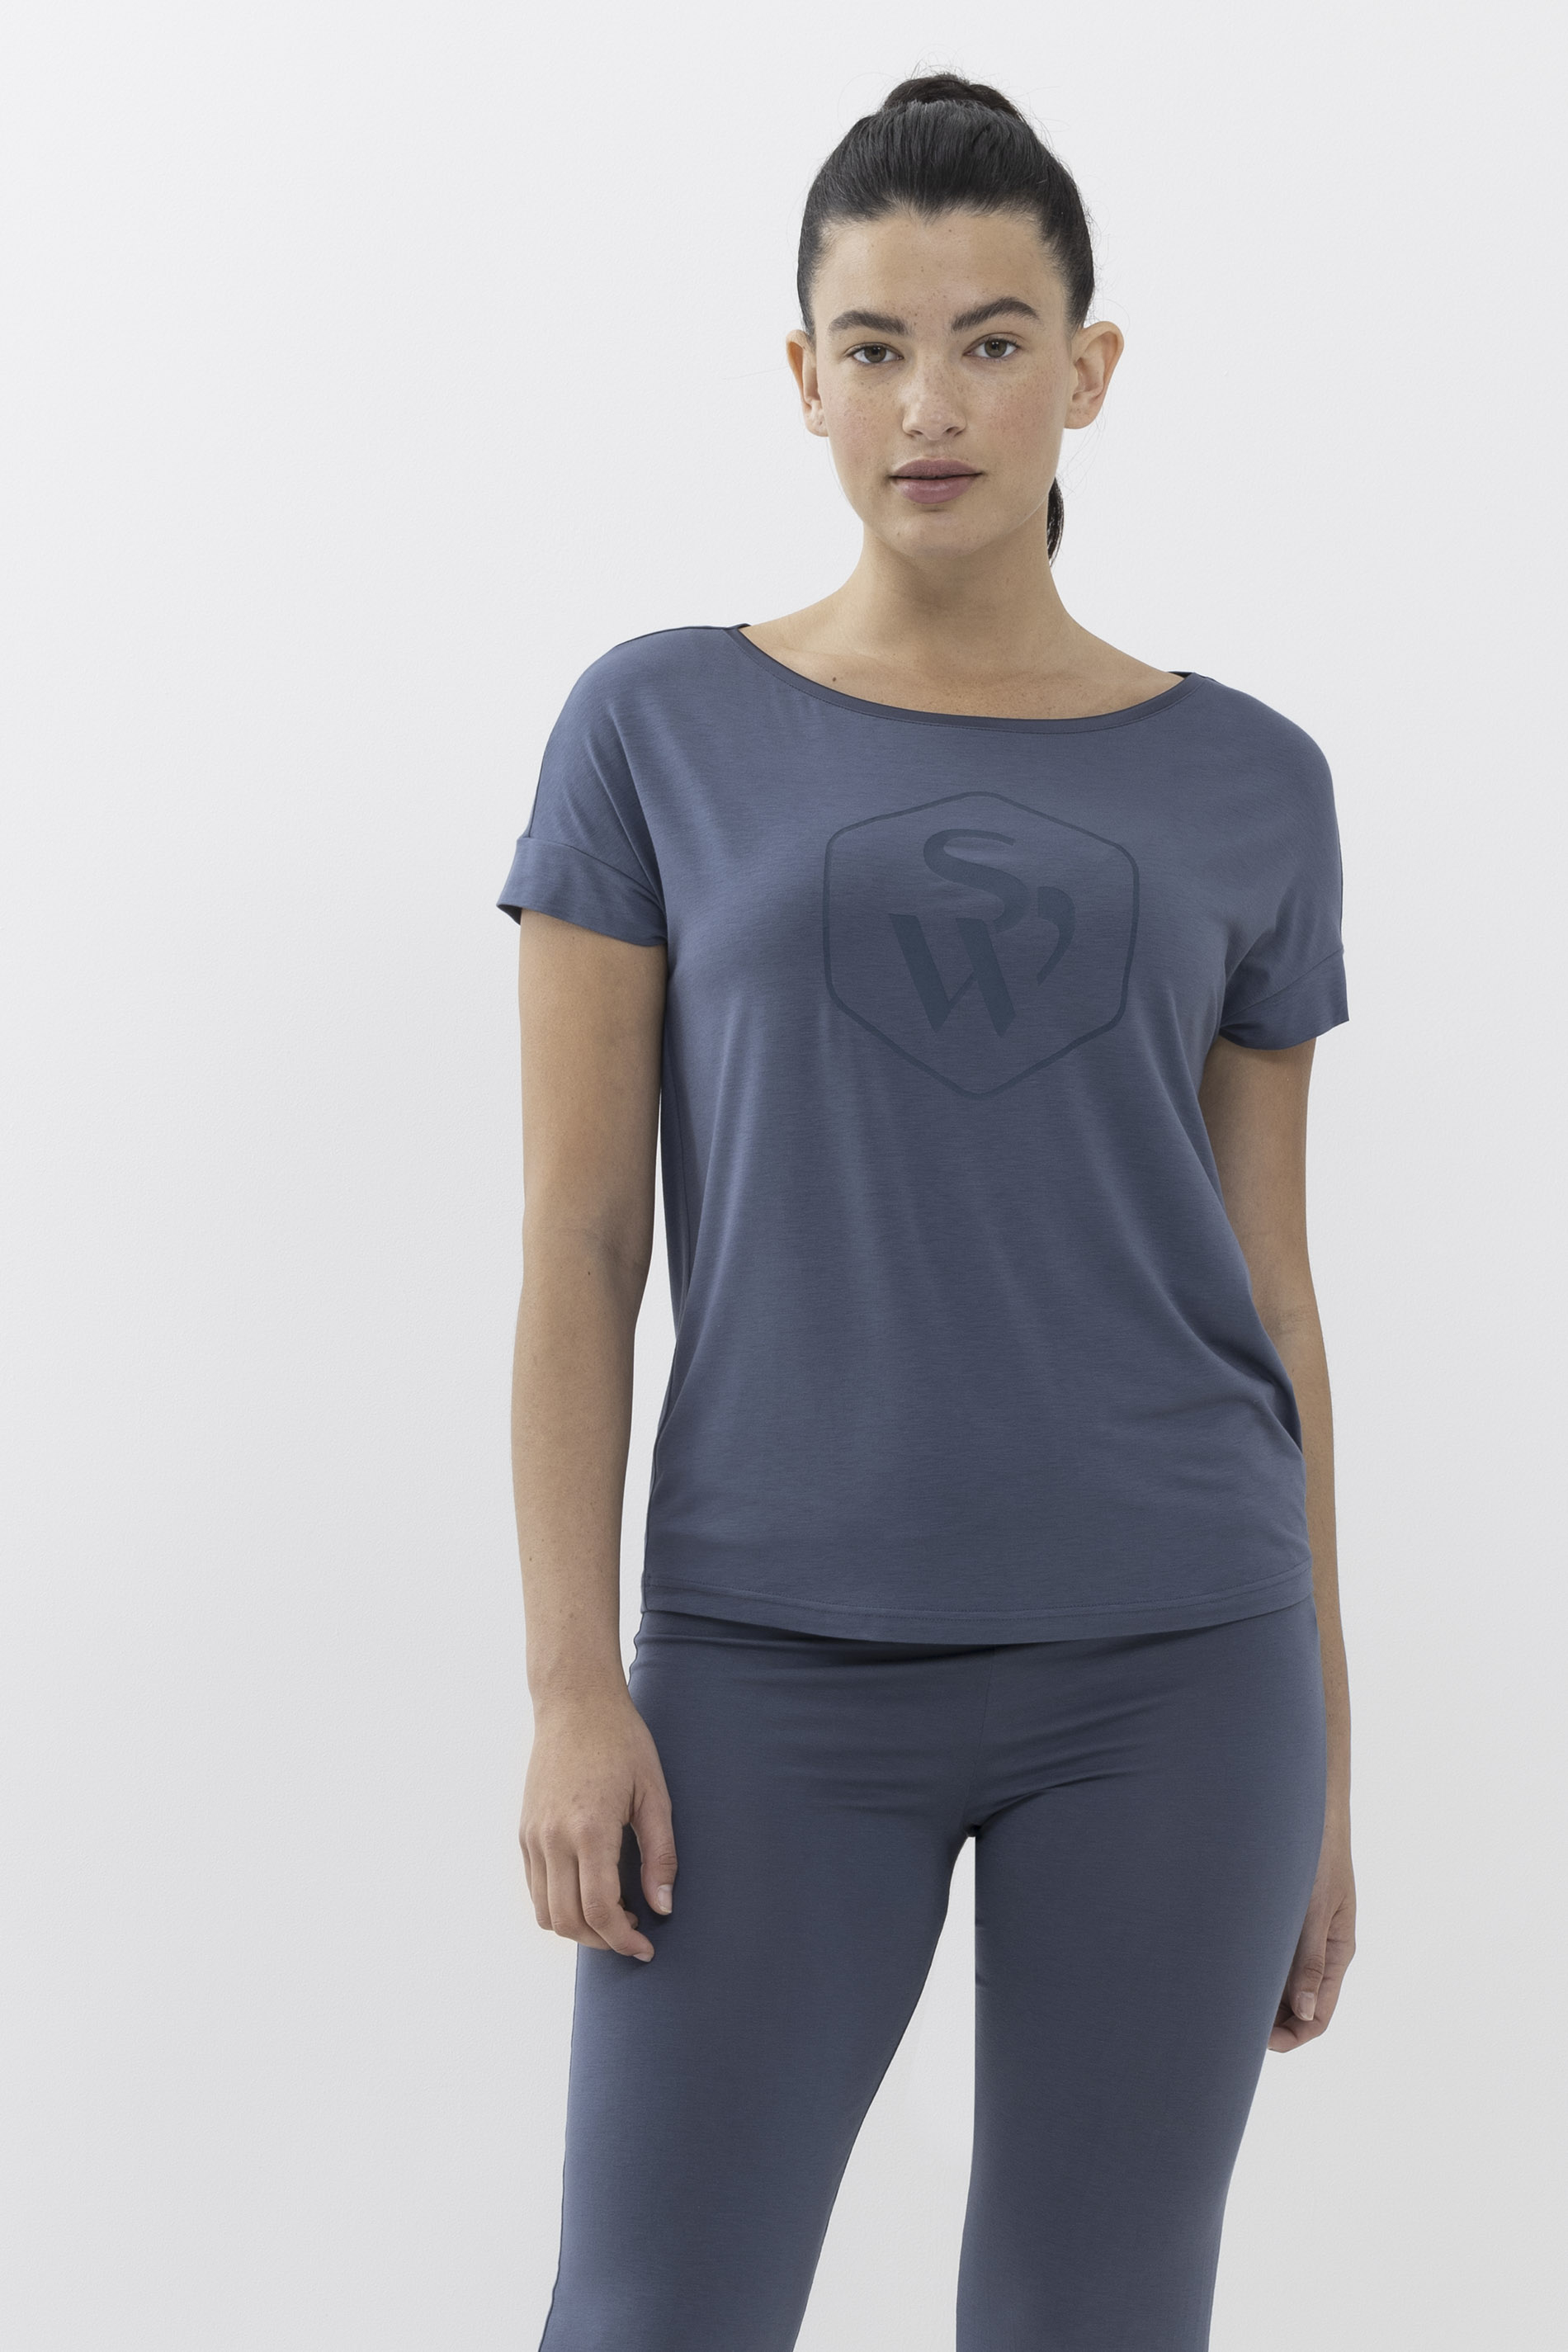 T-Shirt Carbon Serie Breathable Frontansicht | mey®